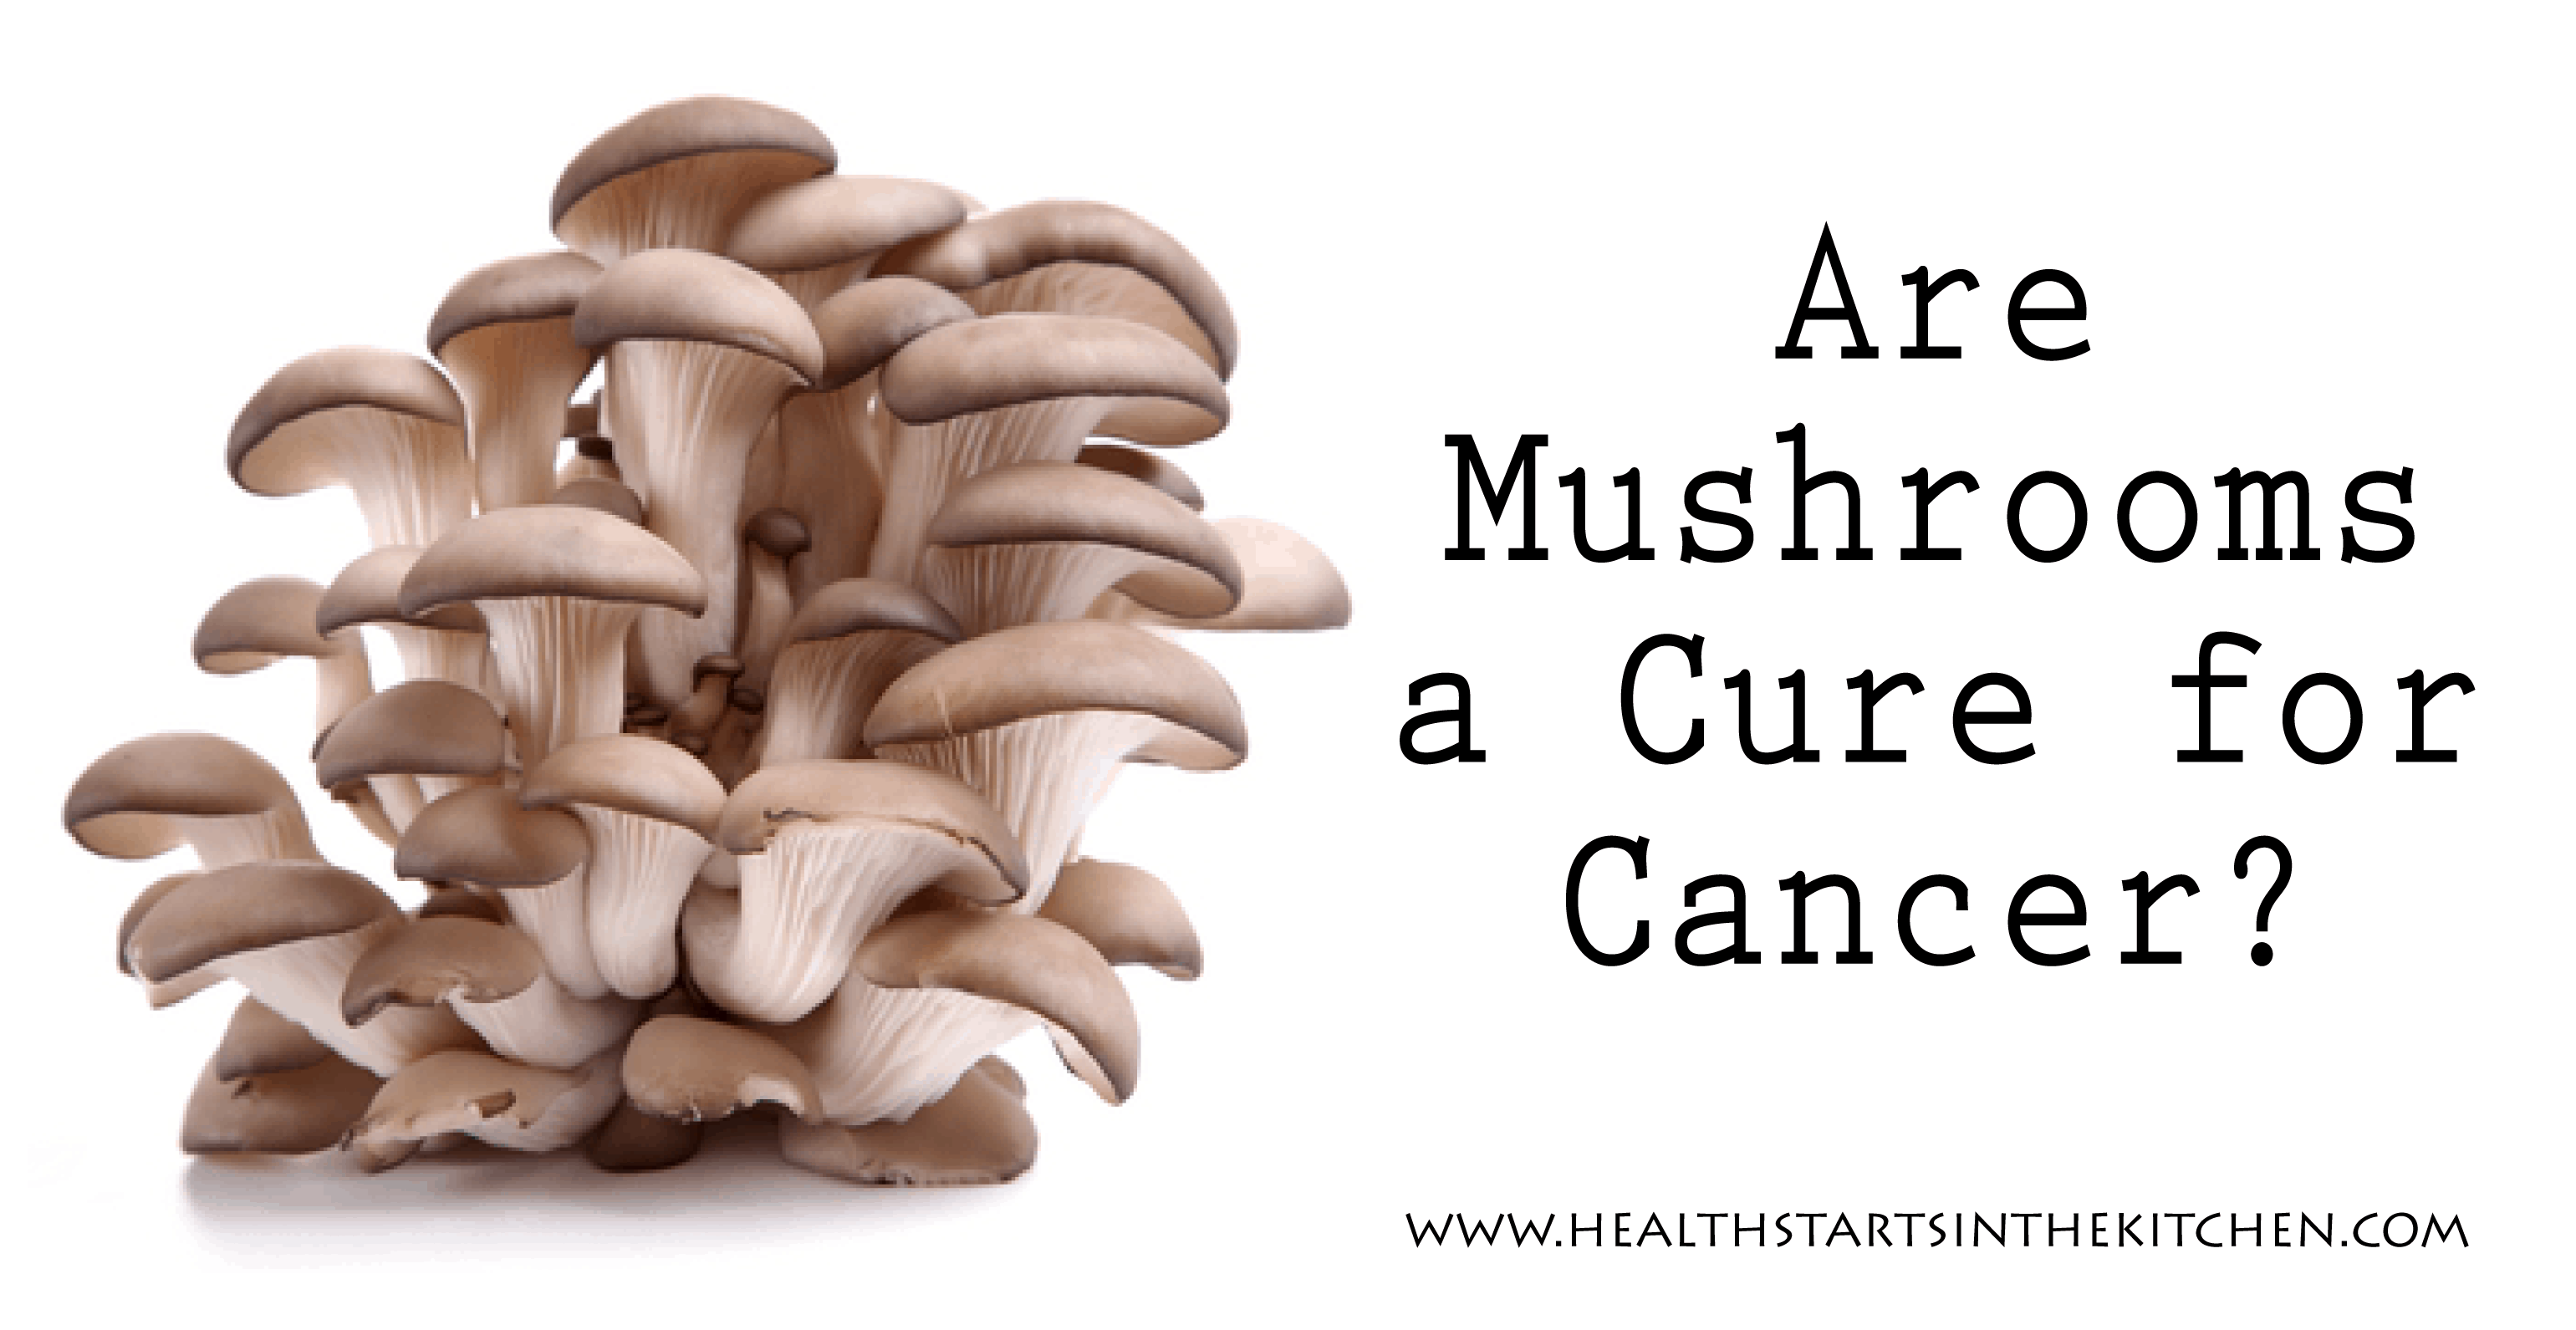 Can mushrooms aid in the treatment of cancer?